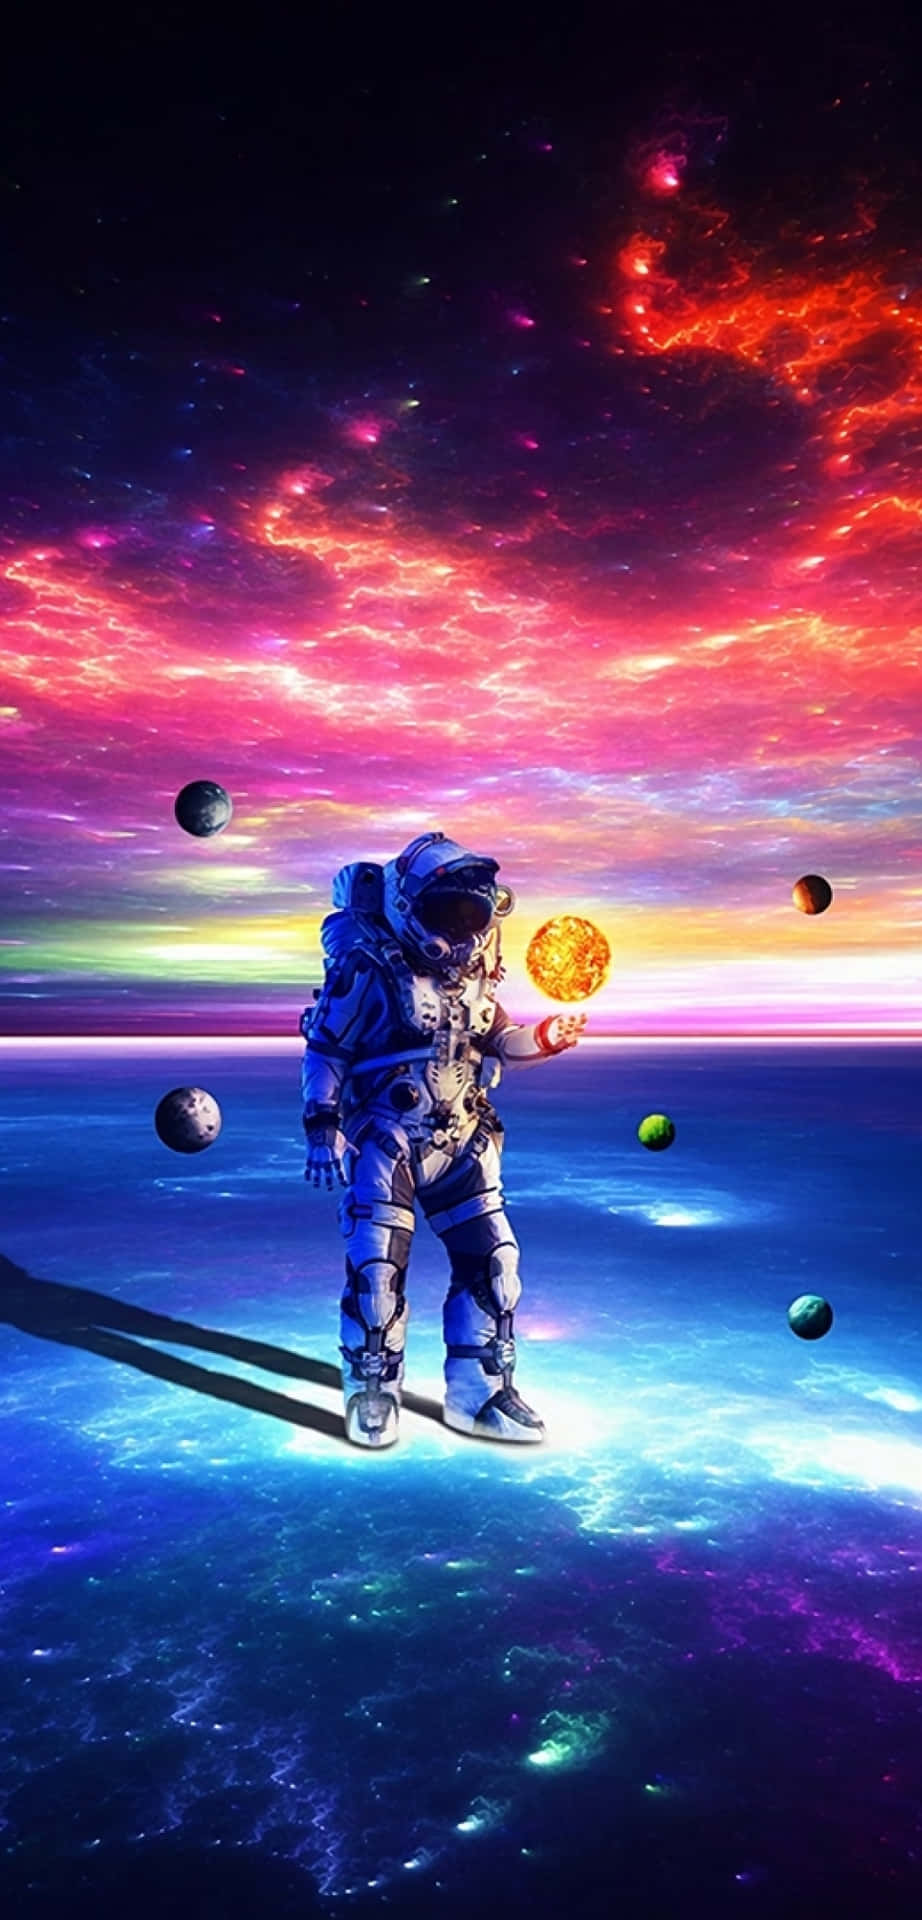 Astronaut floating in outer space Wallpaper